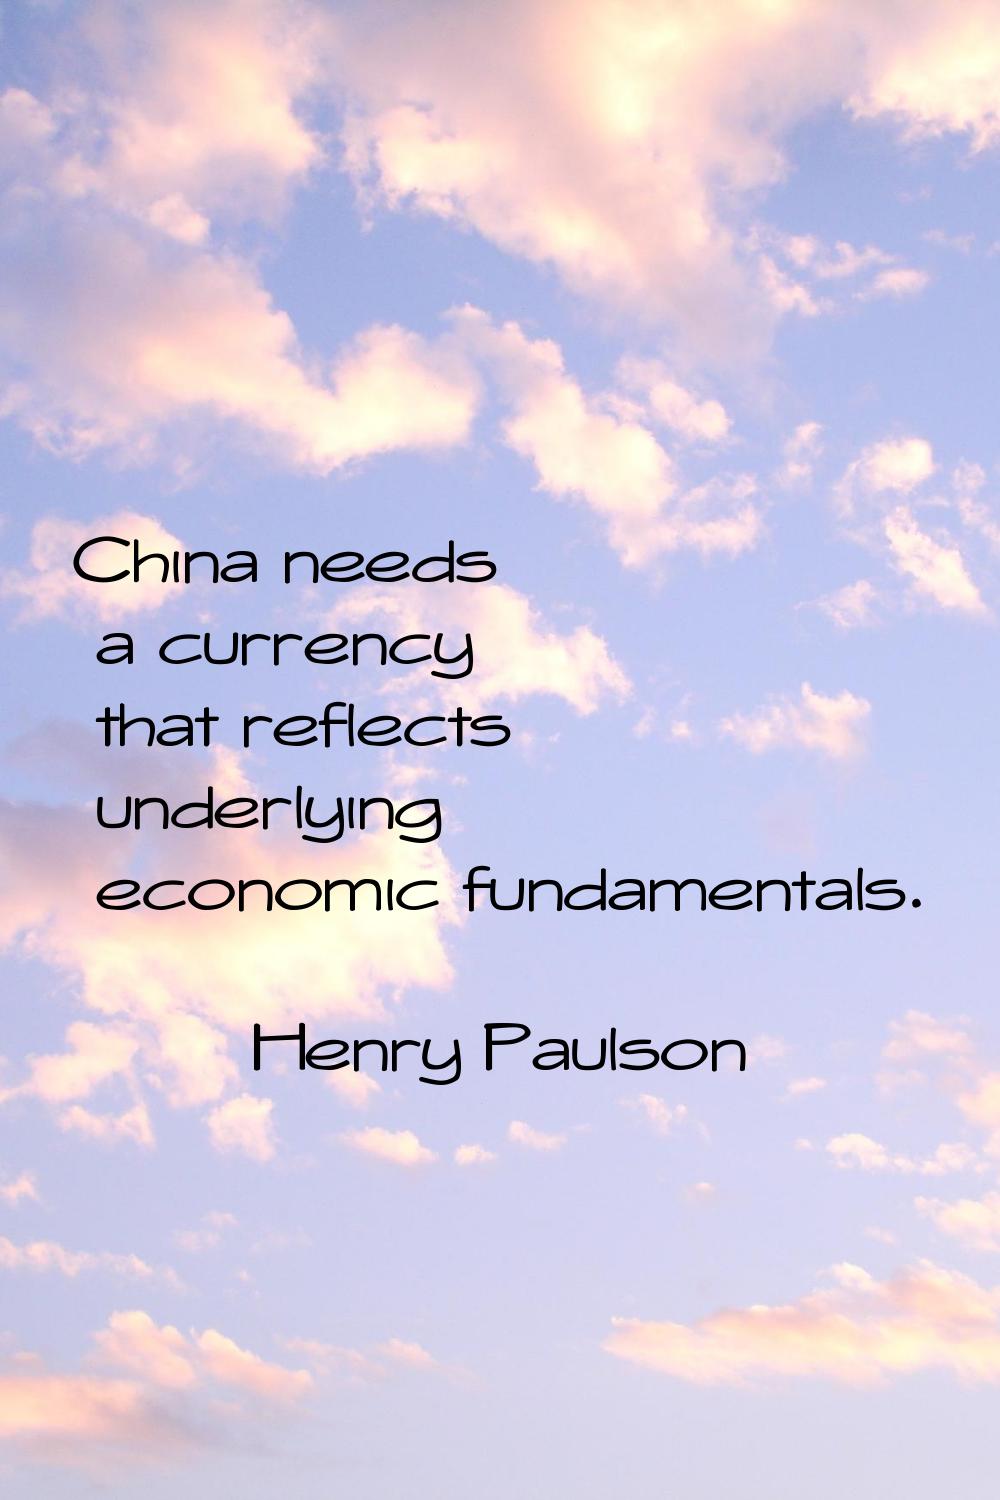 China needs a currency that reflects underlying economic fundamentals.